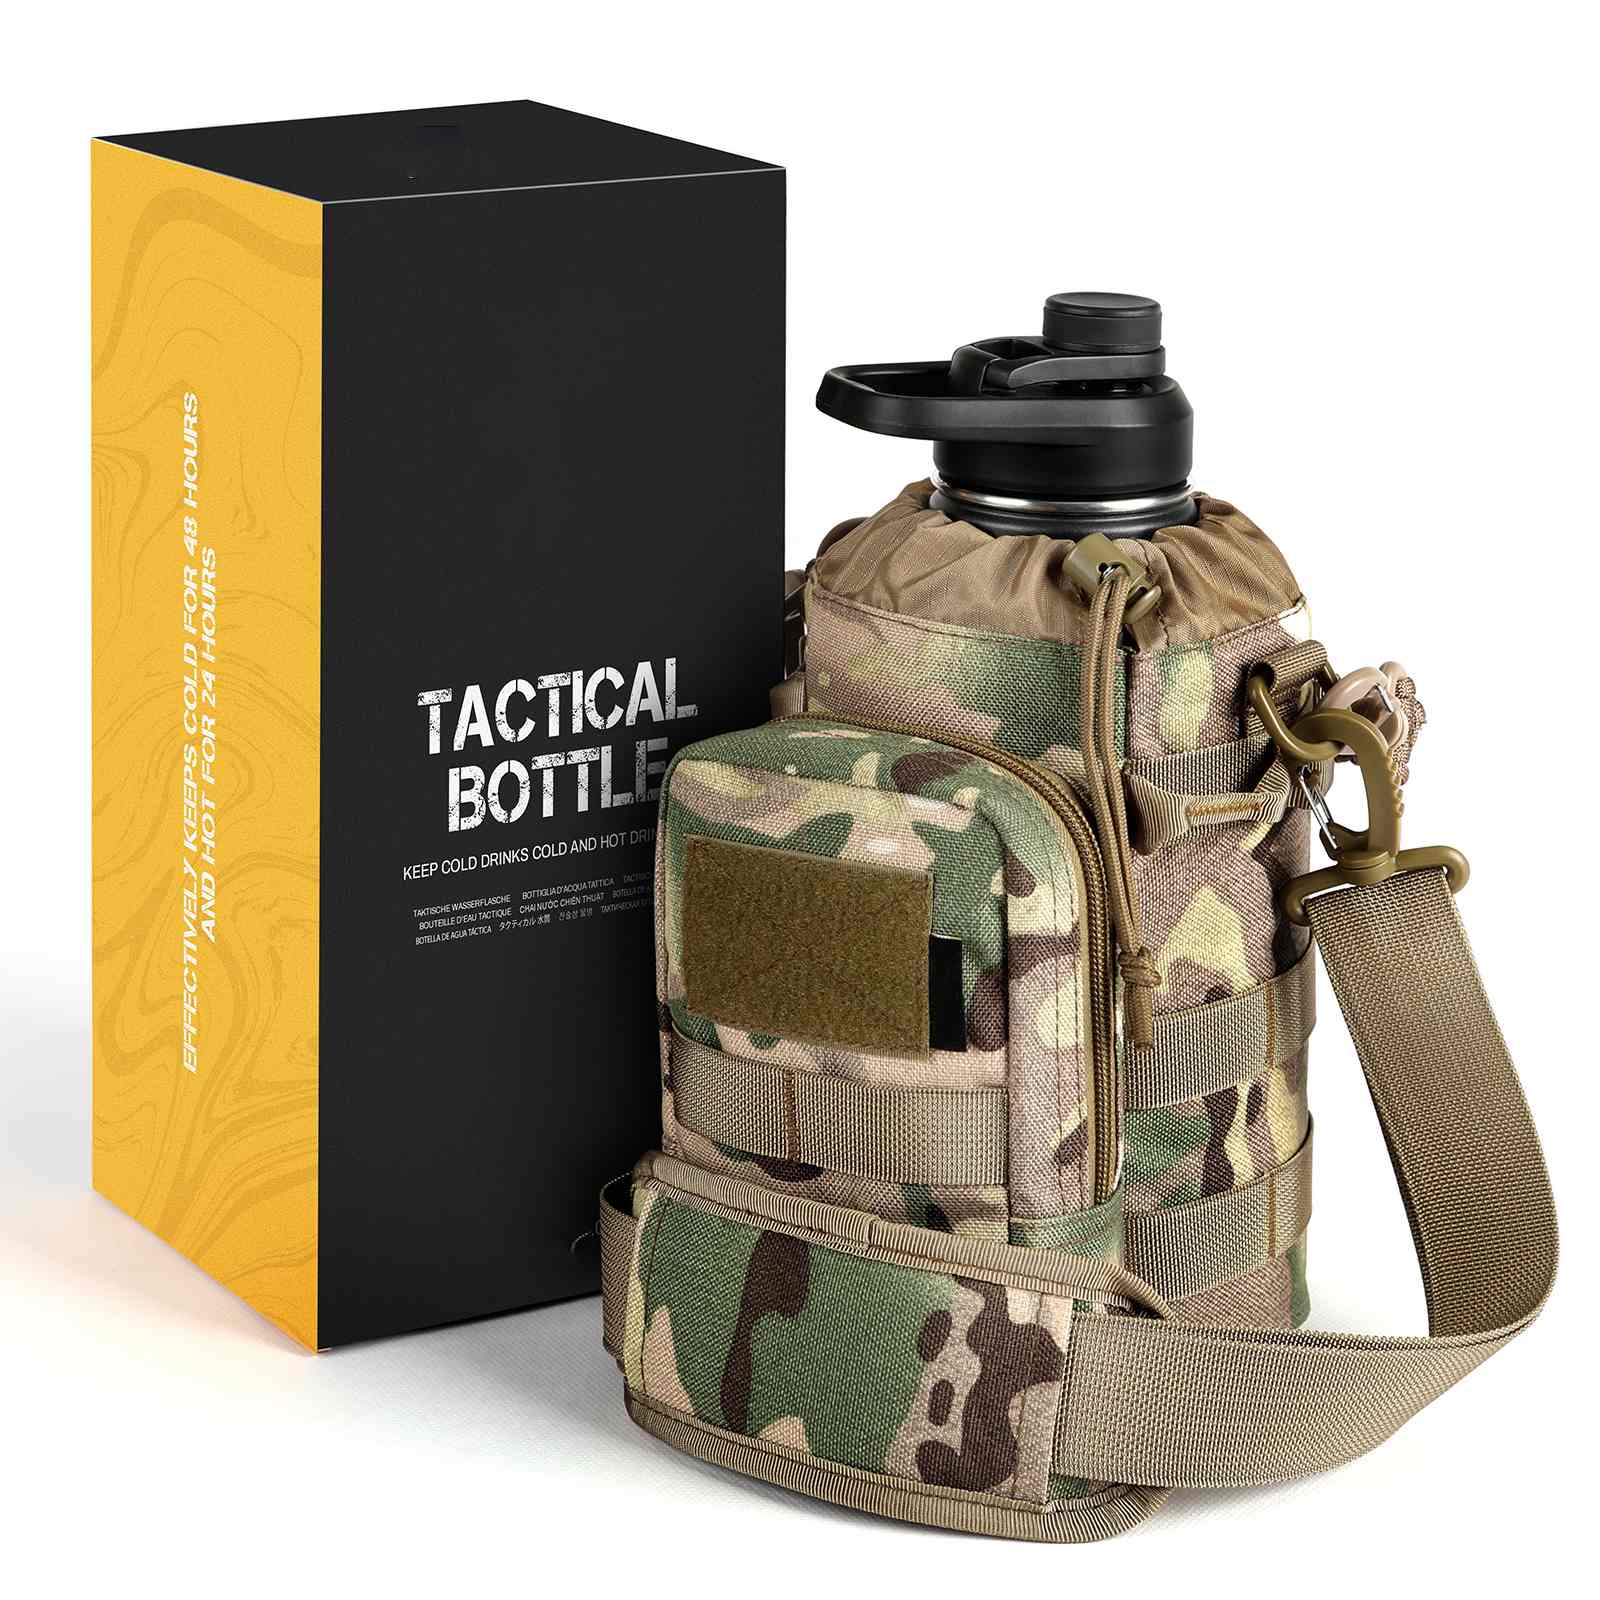 64Oz Half Gallon Stainless Steel Insulated Tactical Water Bottle with Metal Military Water Bottle Tactical Carrier Bag